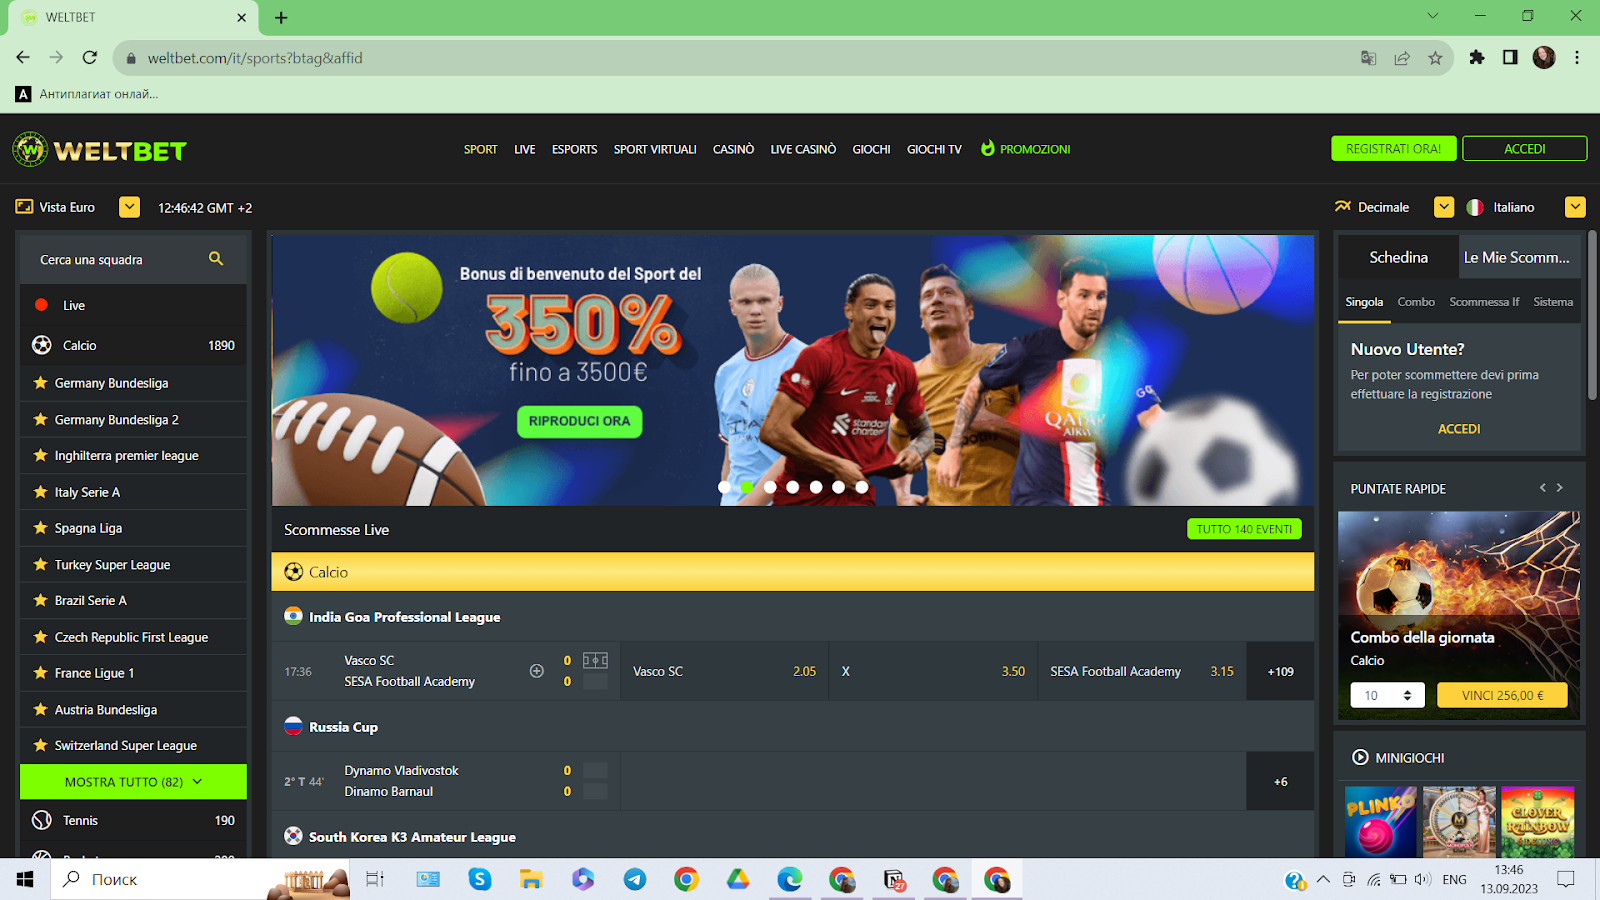 weltbet homepage